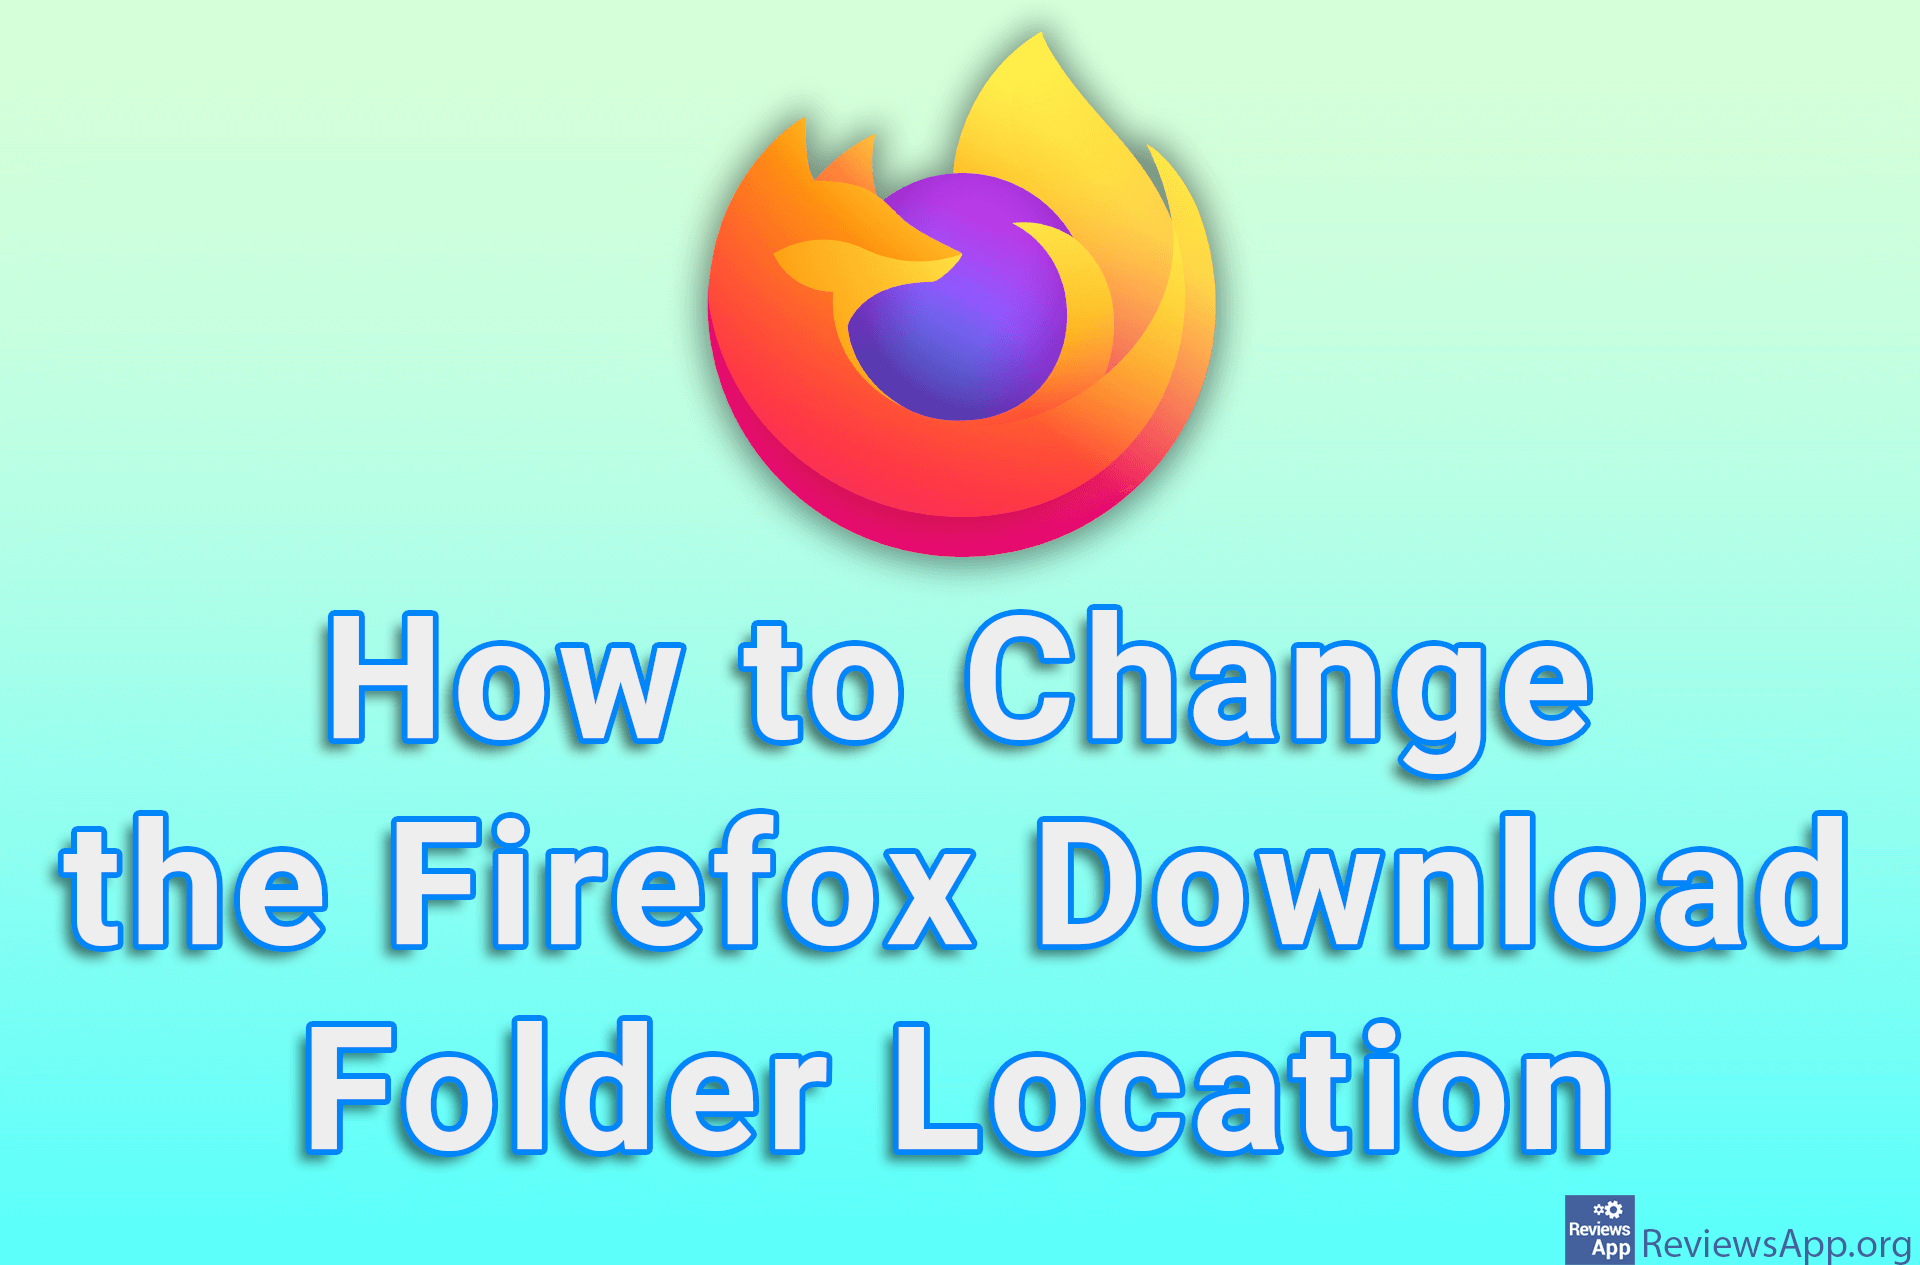 How to Change the Firefox Download Folder Location